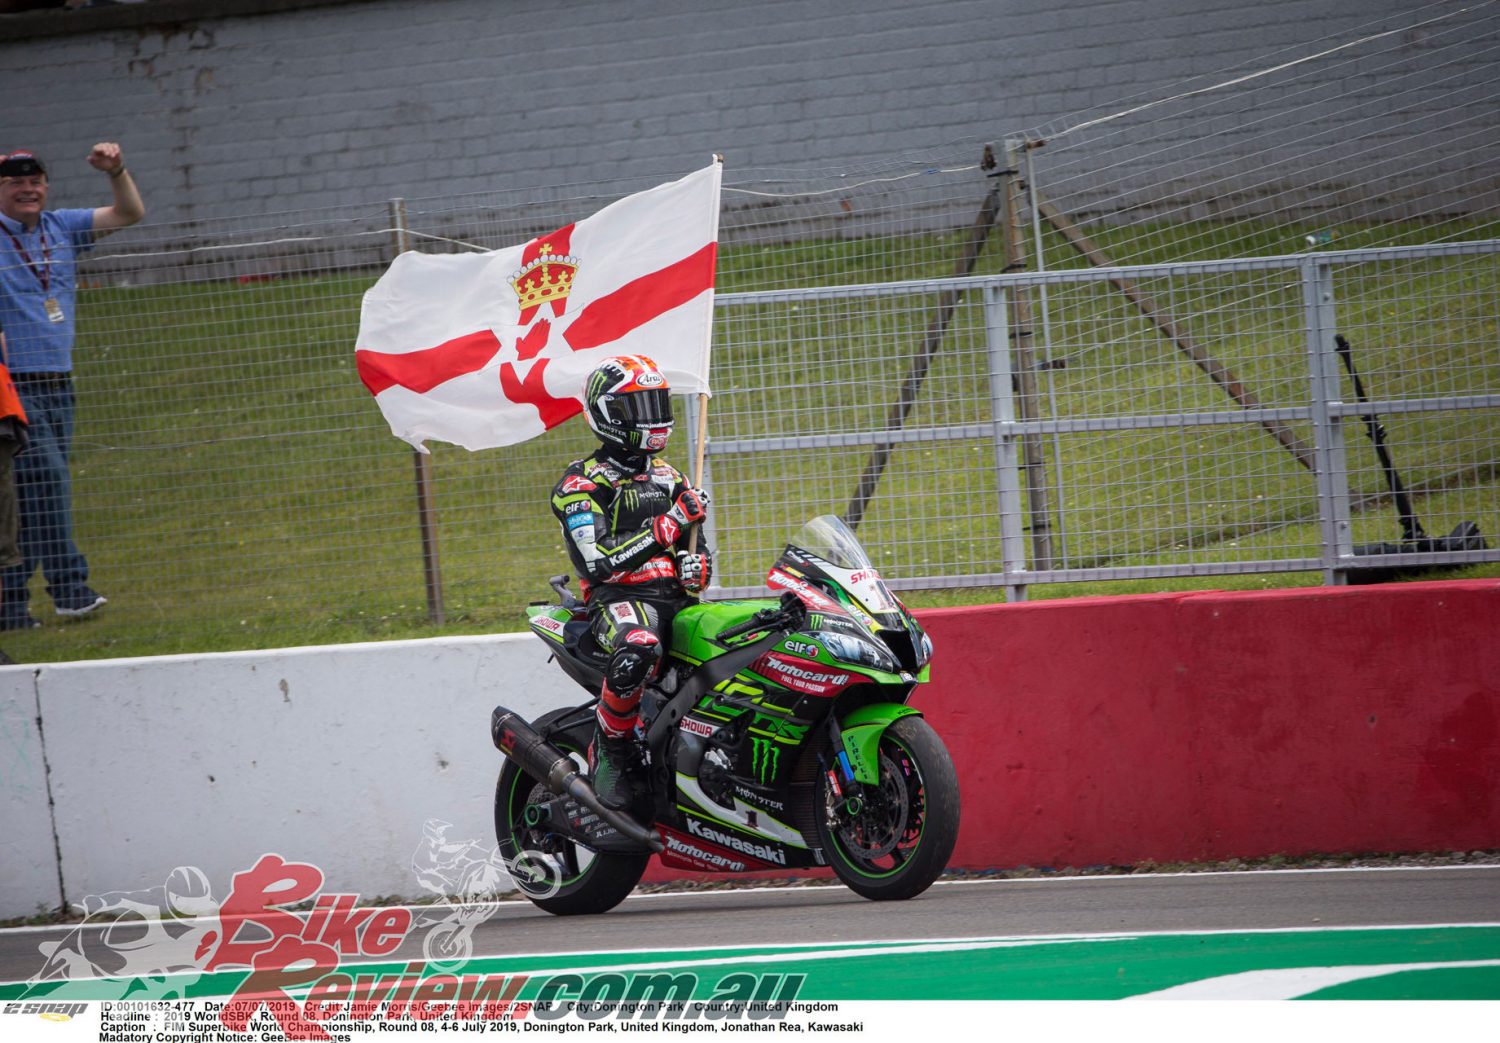 Chasing down Bautista and heading home to rule the roost, Jonathan Rea (Kawasaki Racing Team WorldSBK) will be keen to continue his success at Donington Park.